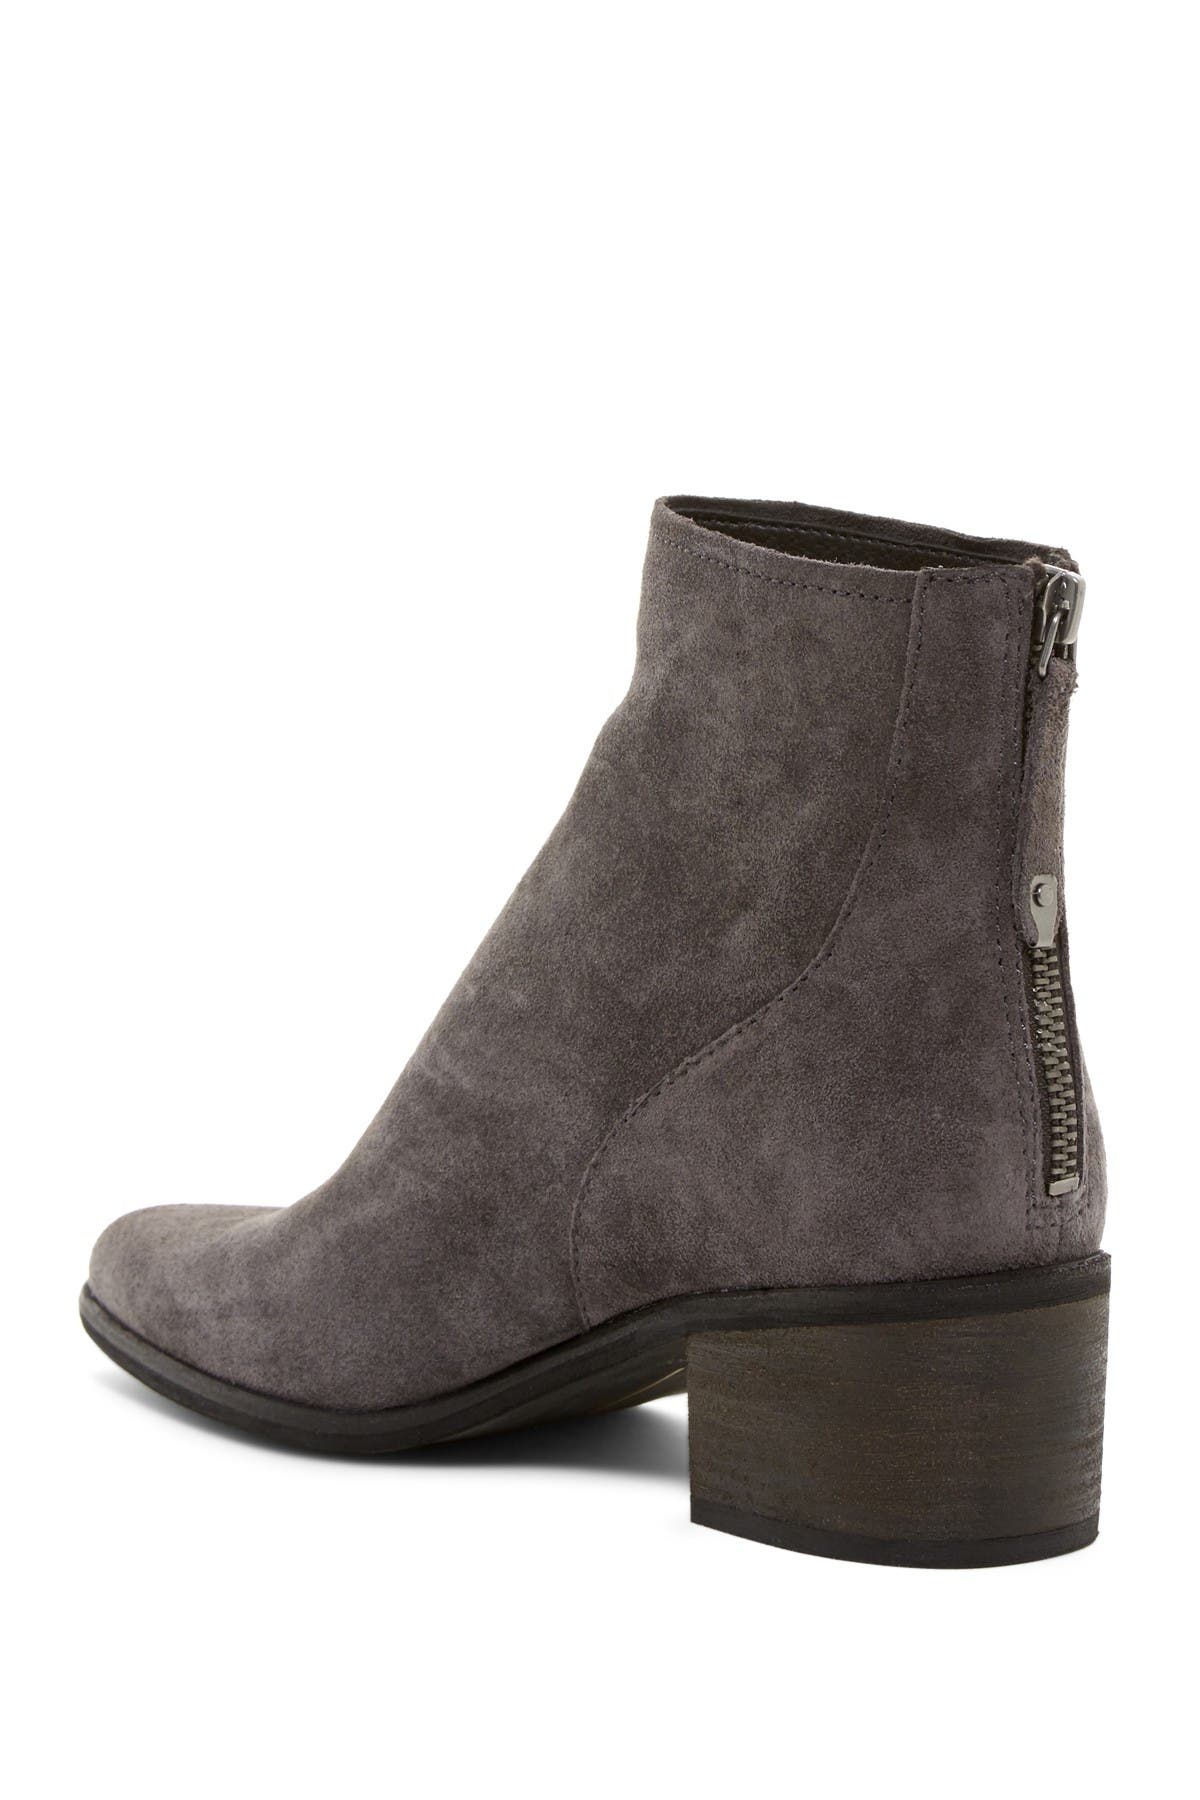 dolce vita women's cassius ankle boot